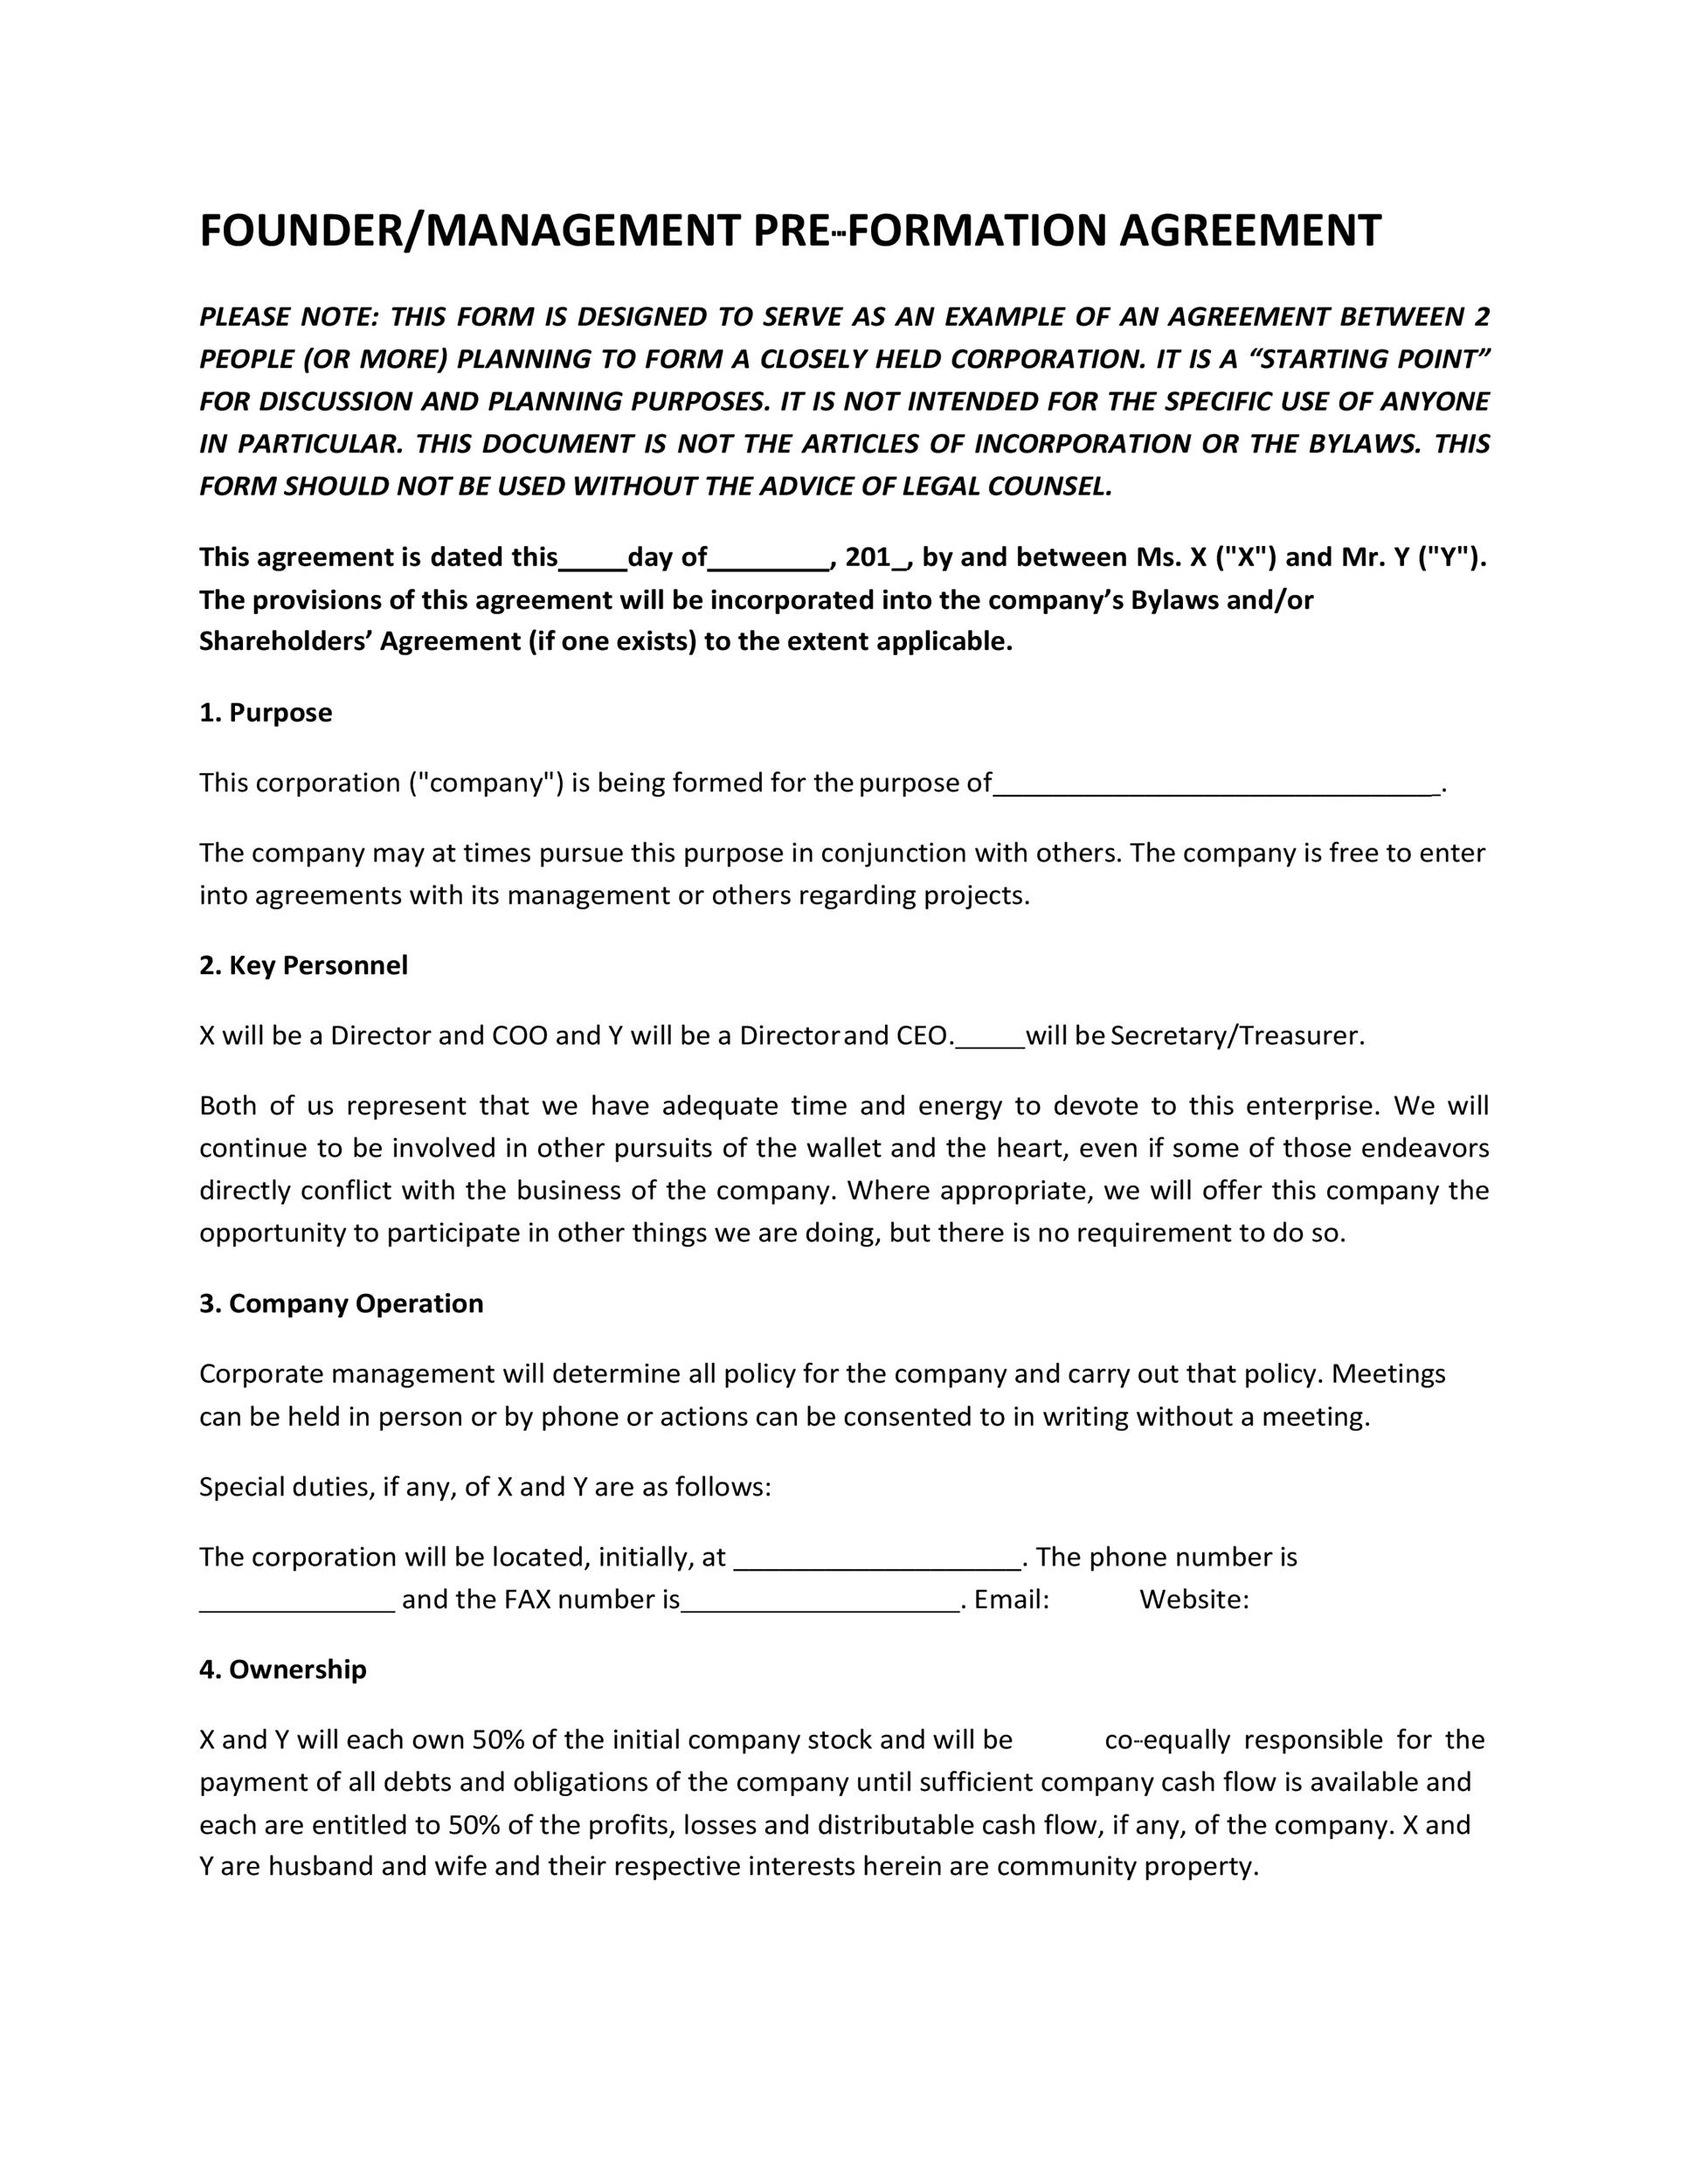 Free founders agreement 17